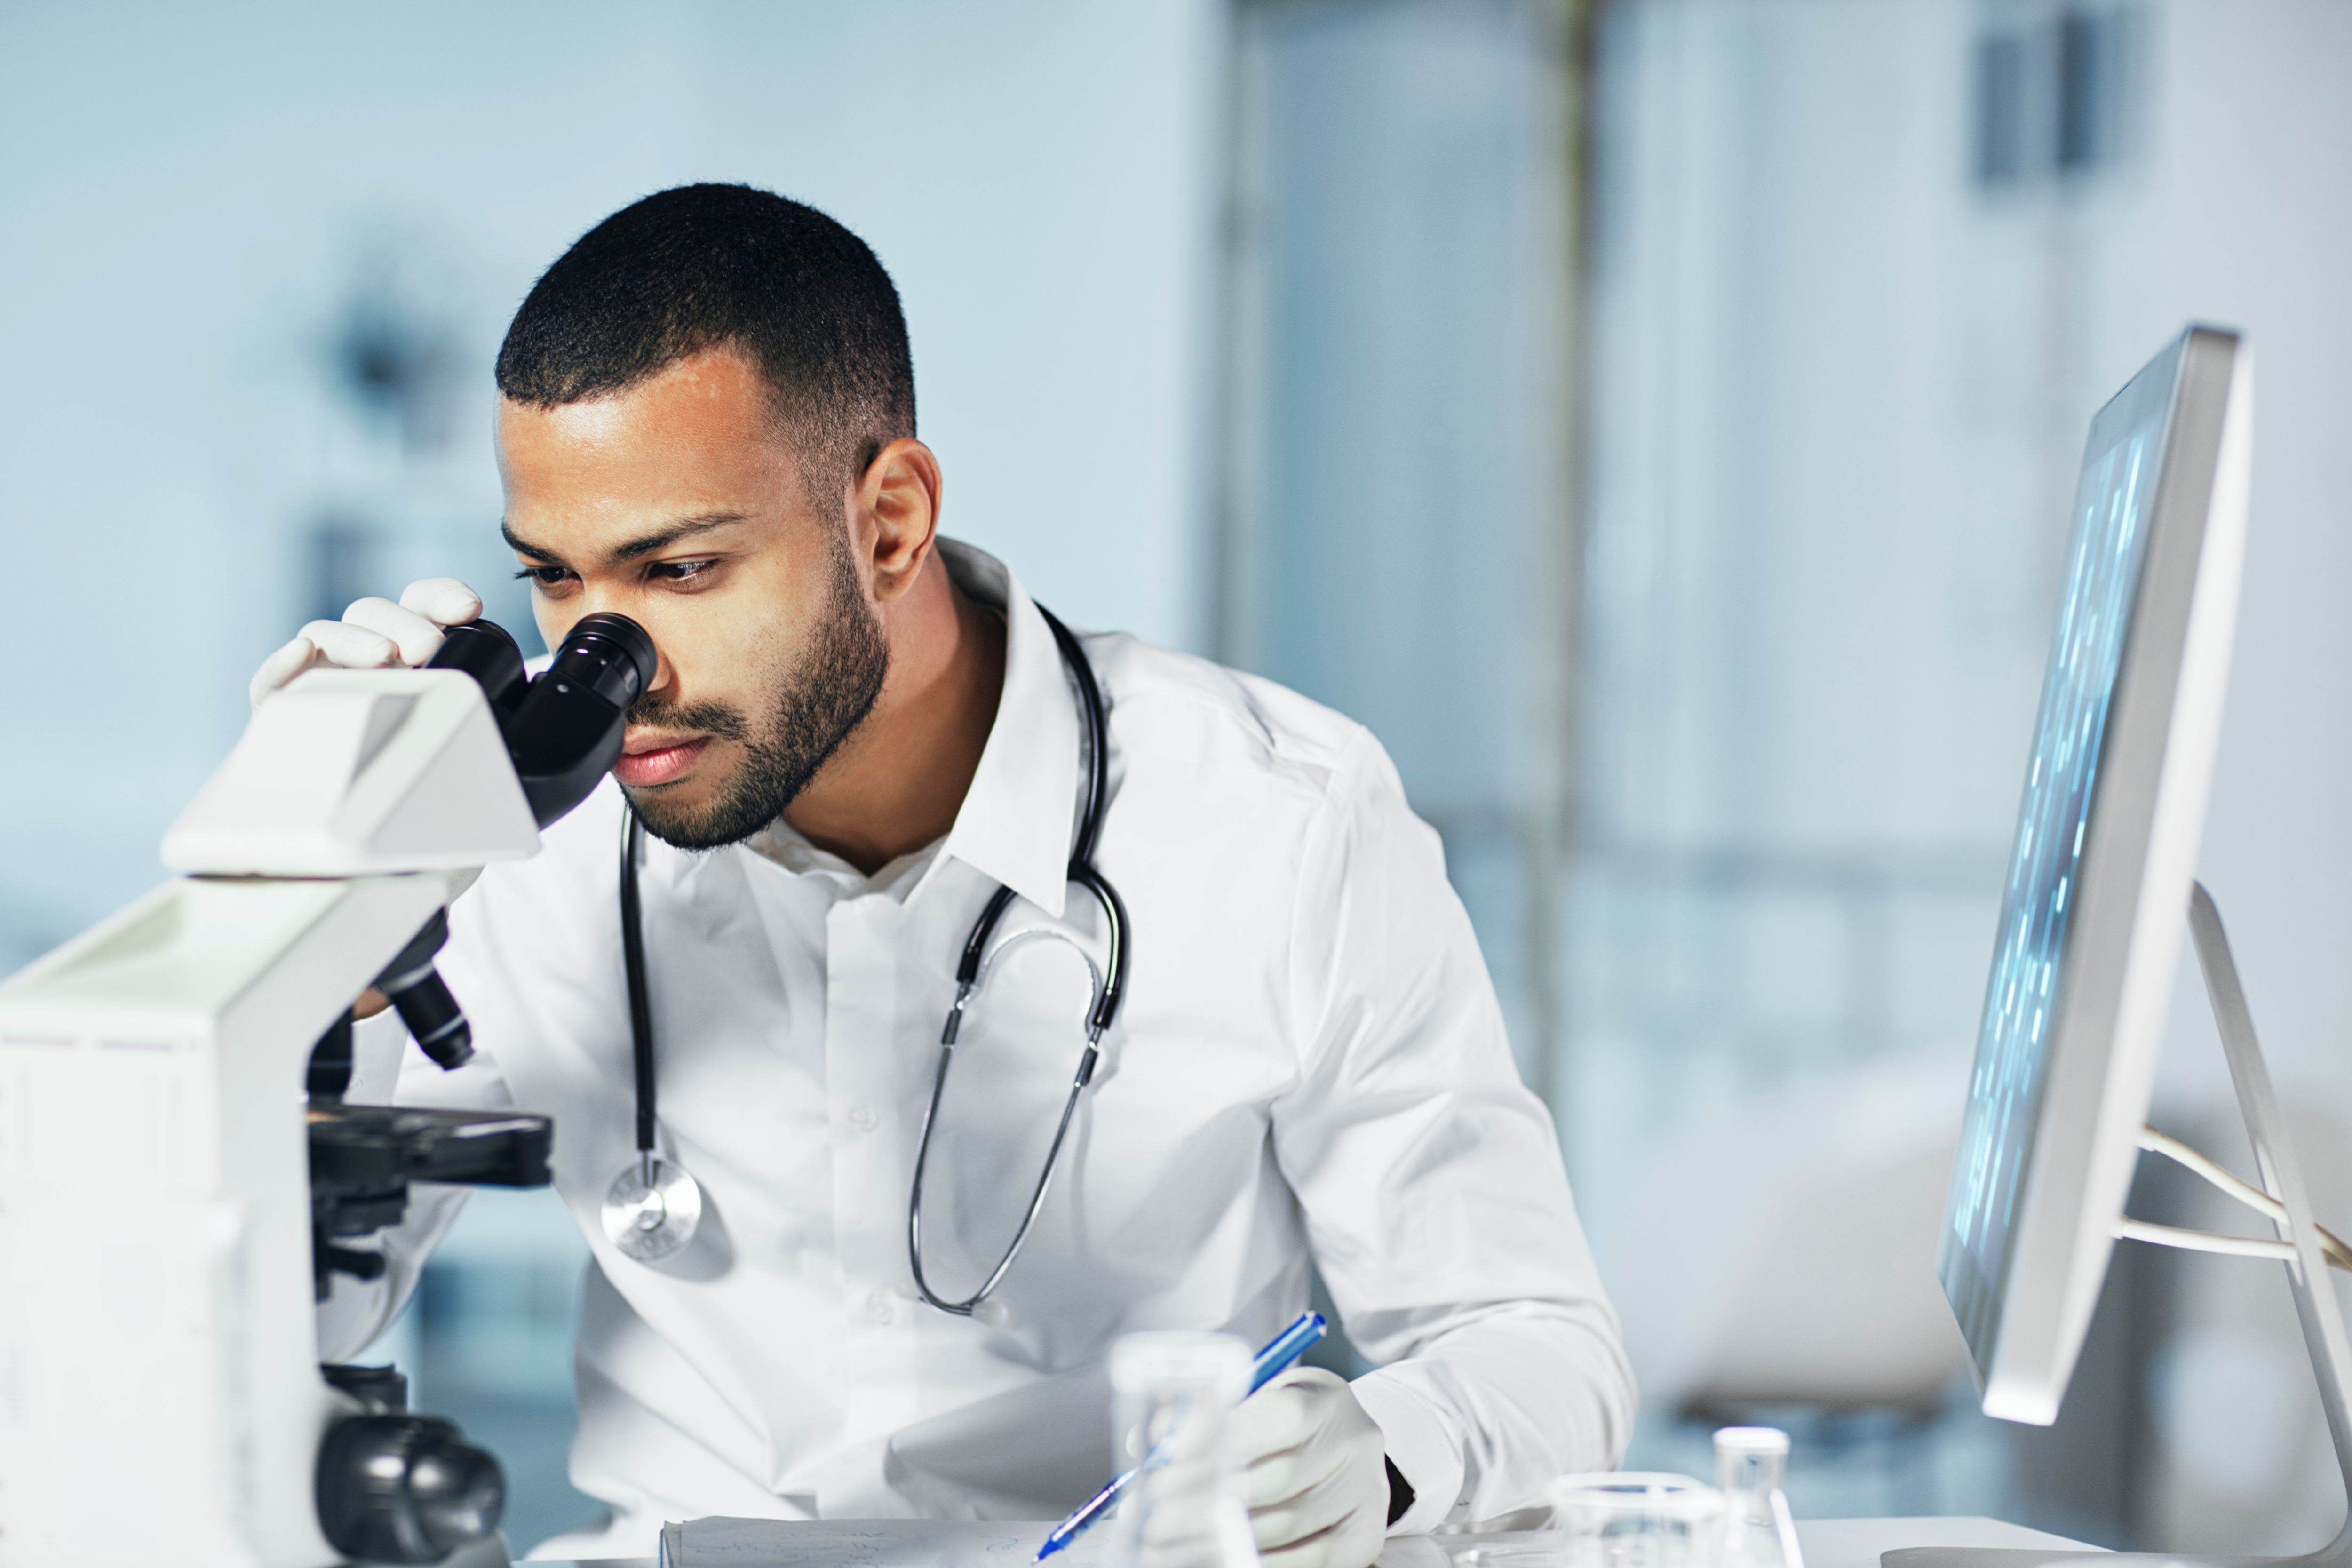 Young scientist wearing a stethoscope around his neck looking through a microscope in the lab.